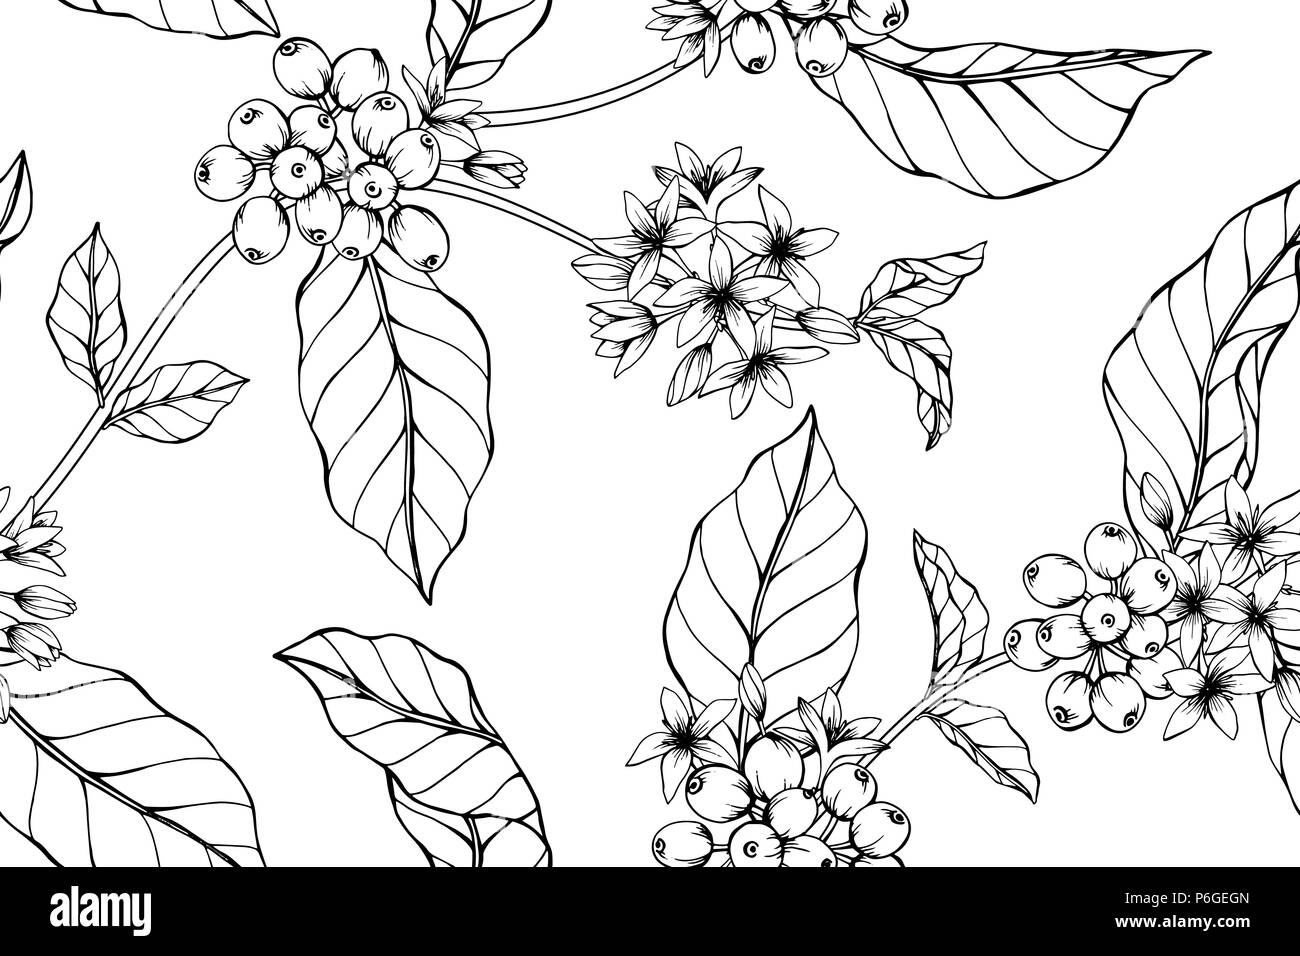 Seamless Coffee tree pattern background. Black and white with drawing line art illustration. Stock Vector